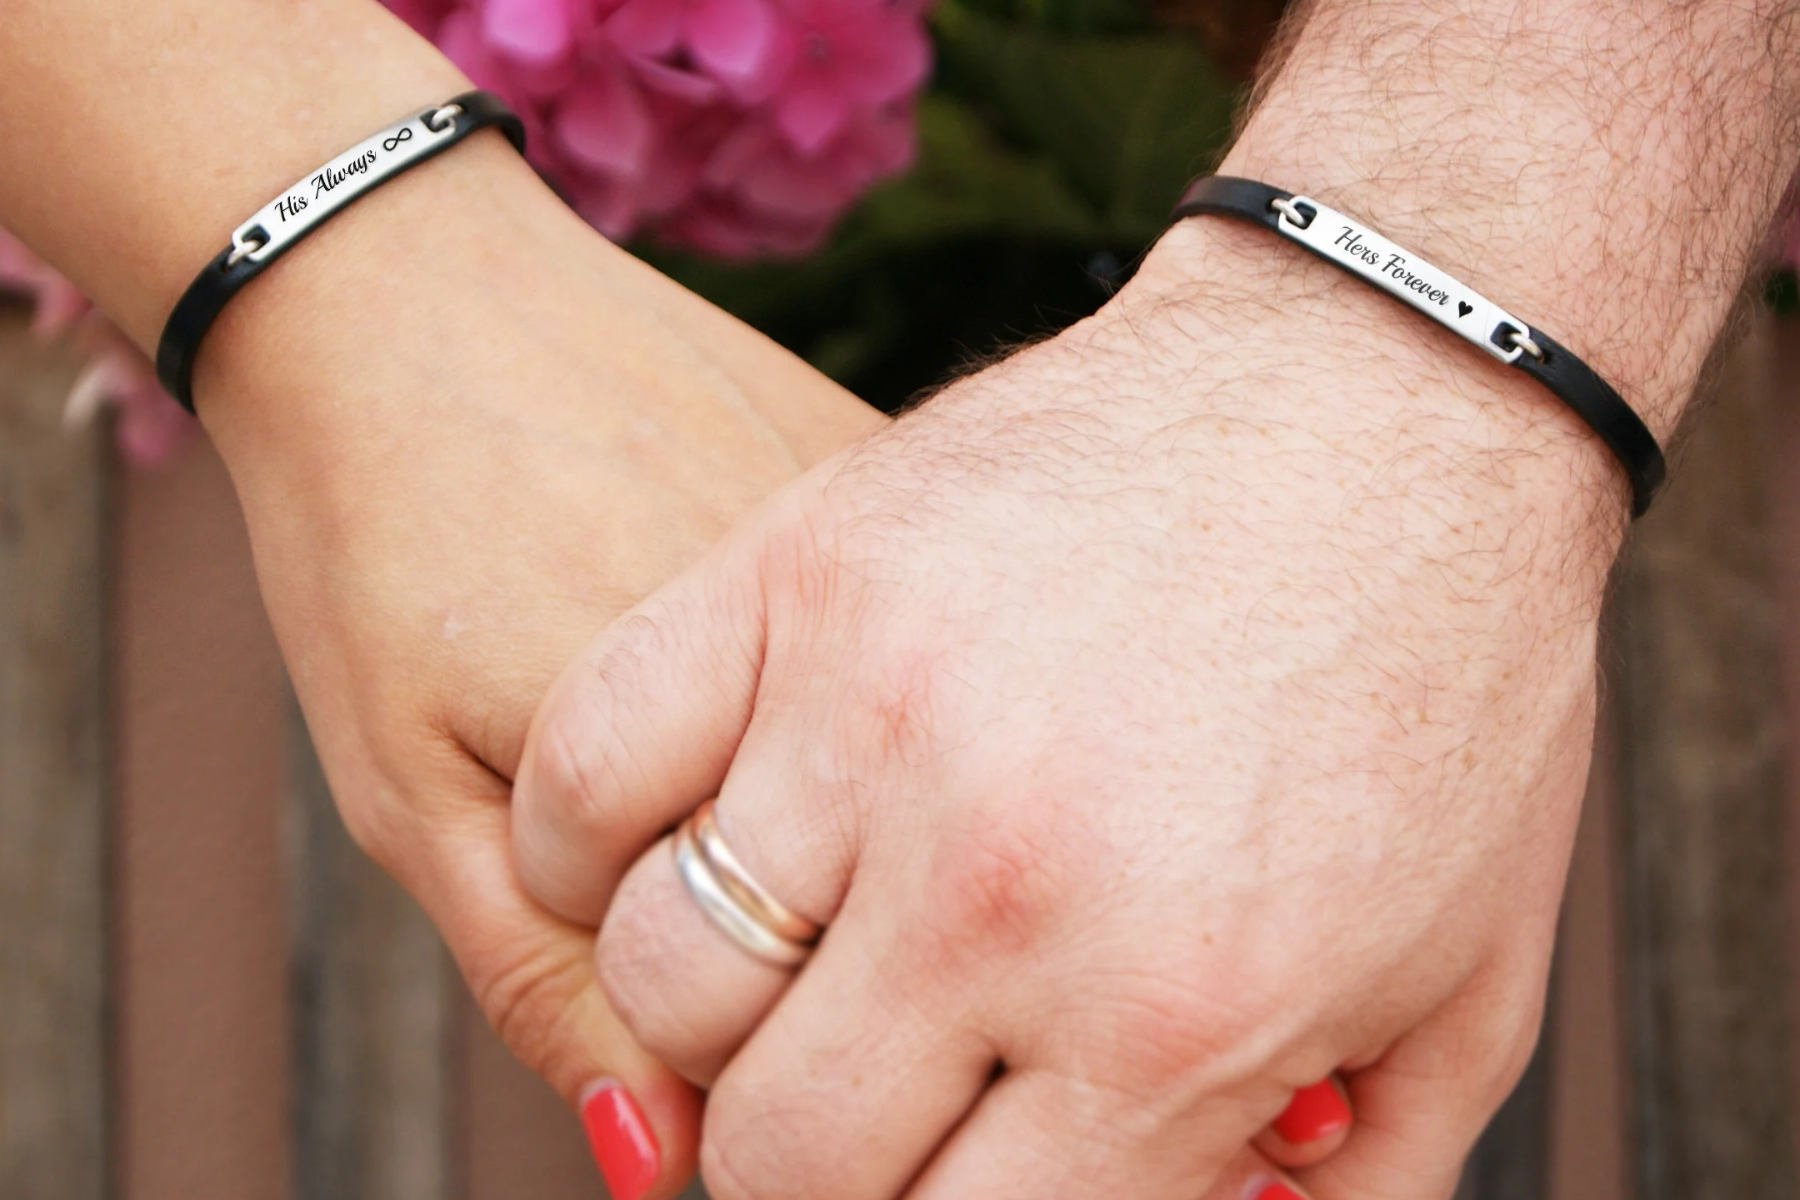 Custom Jewelry For Couples Incorporate Personal Touches Into Your Jewelry